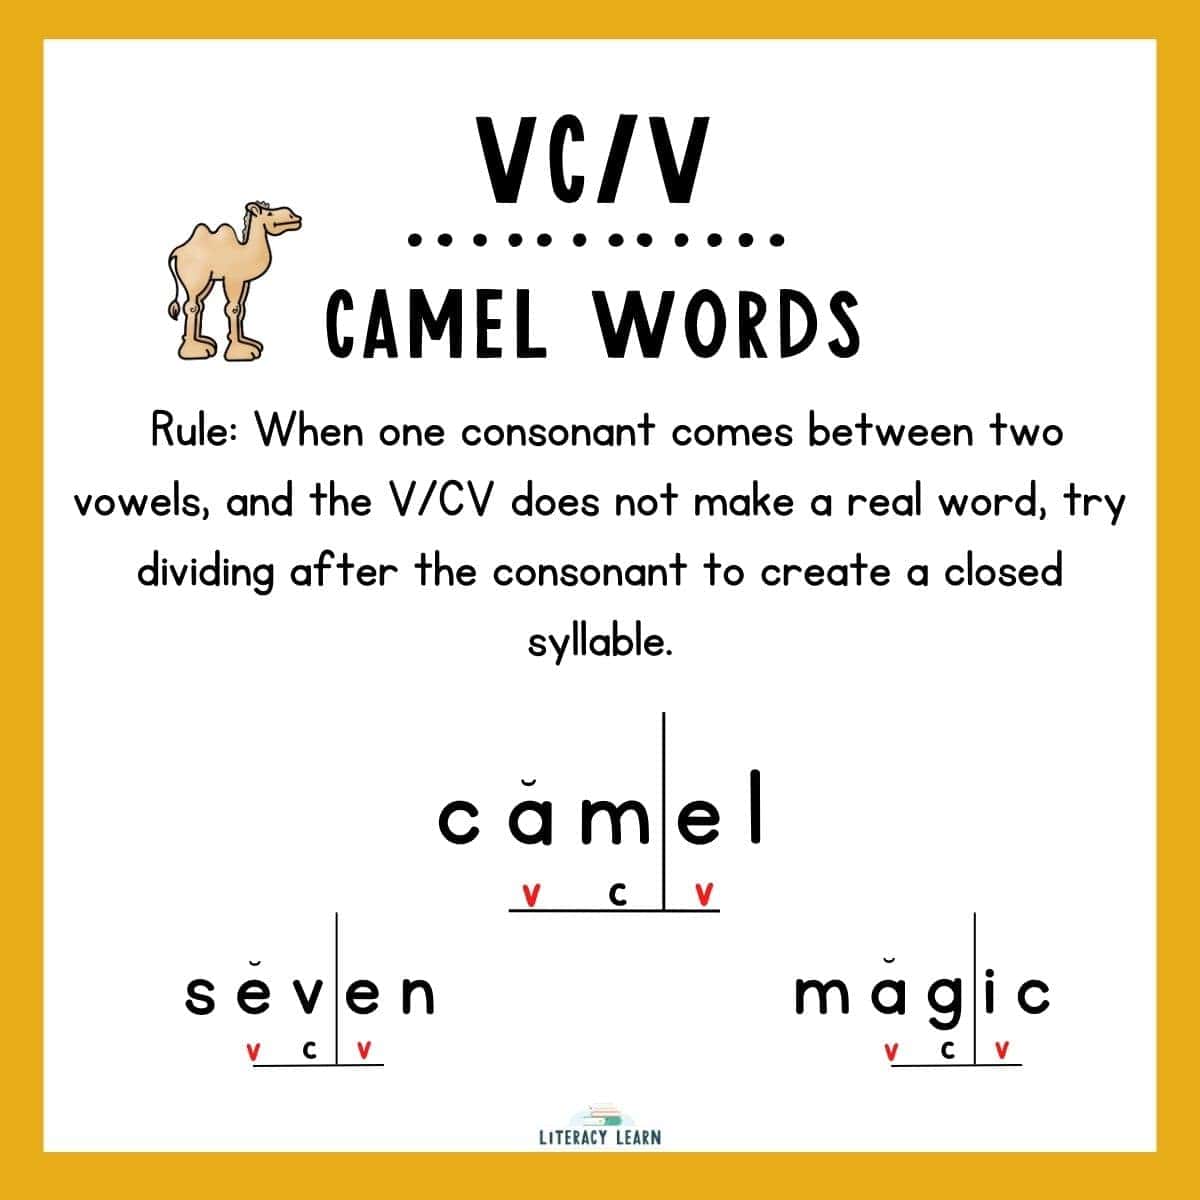 Graphic entitled "Camel Words" with the rule and examples of words divided by VC/V pattern.